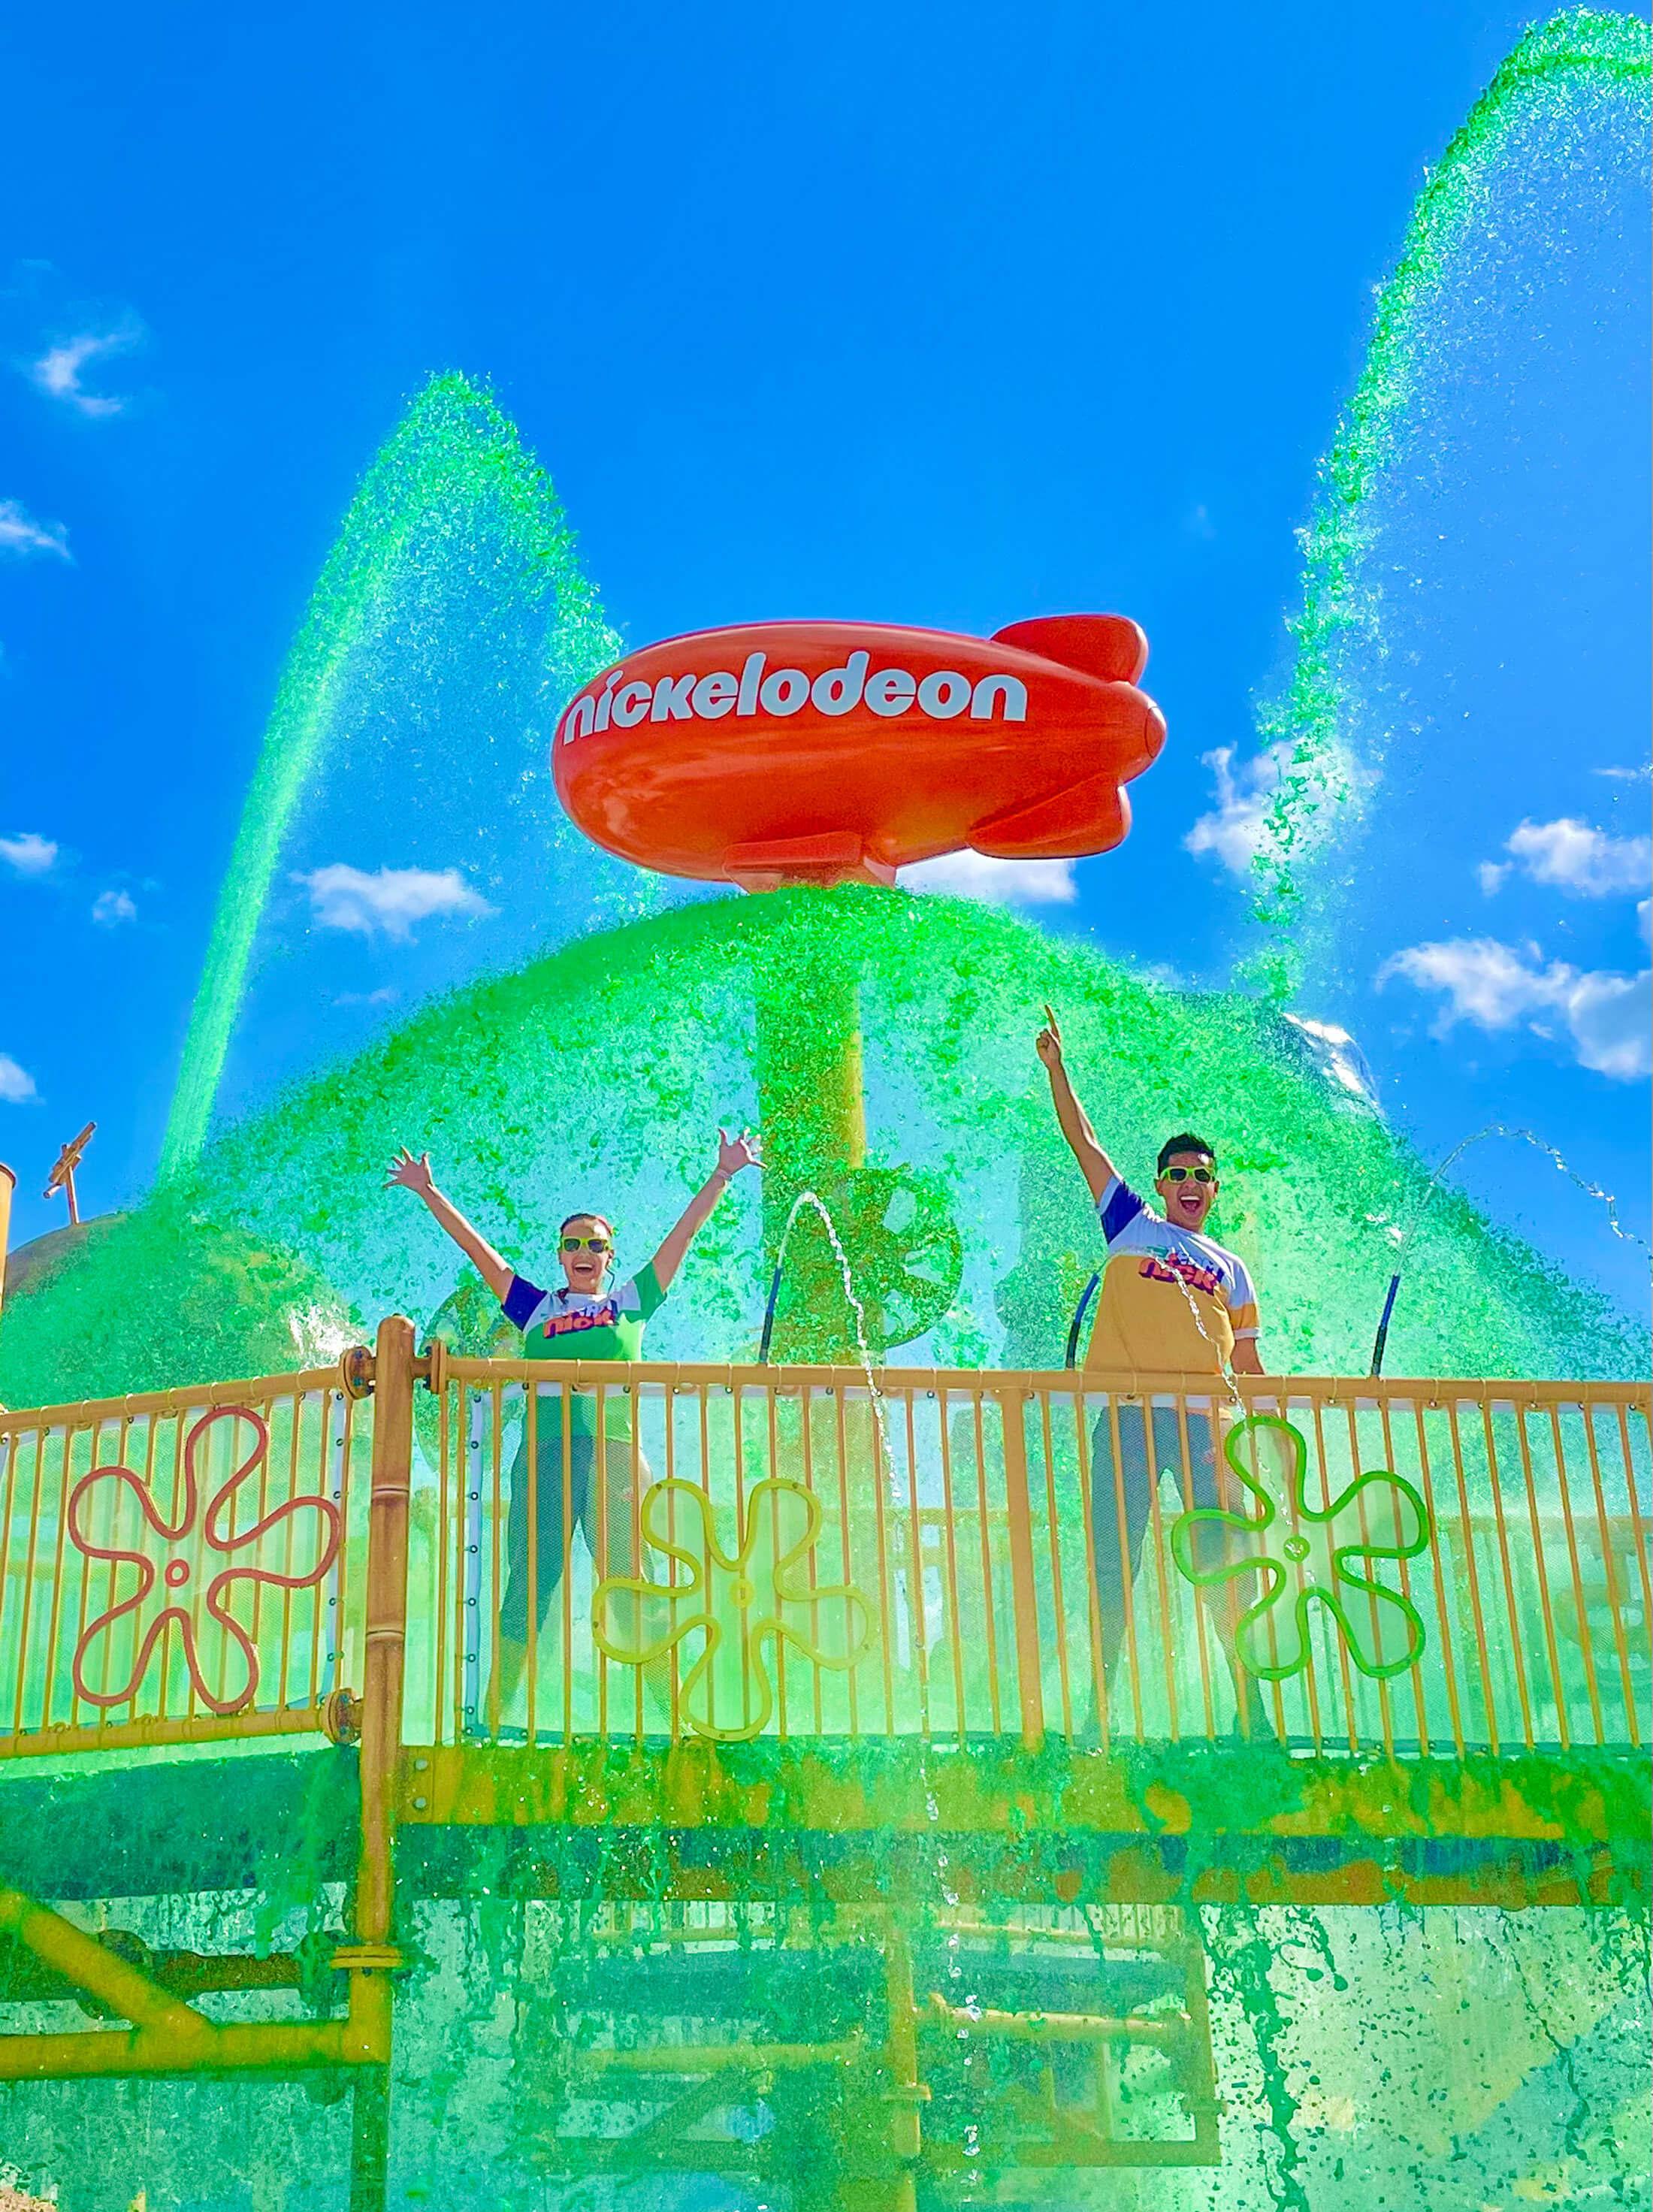 Nickelodon staff standing in front of Nickelodeon Blimp statue